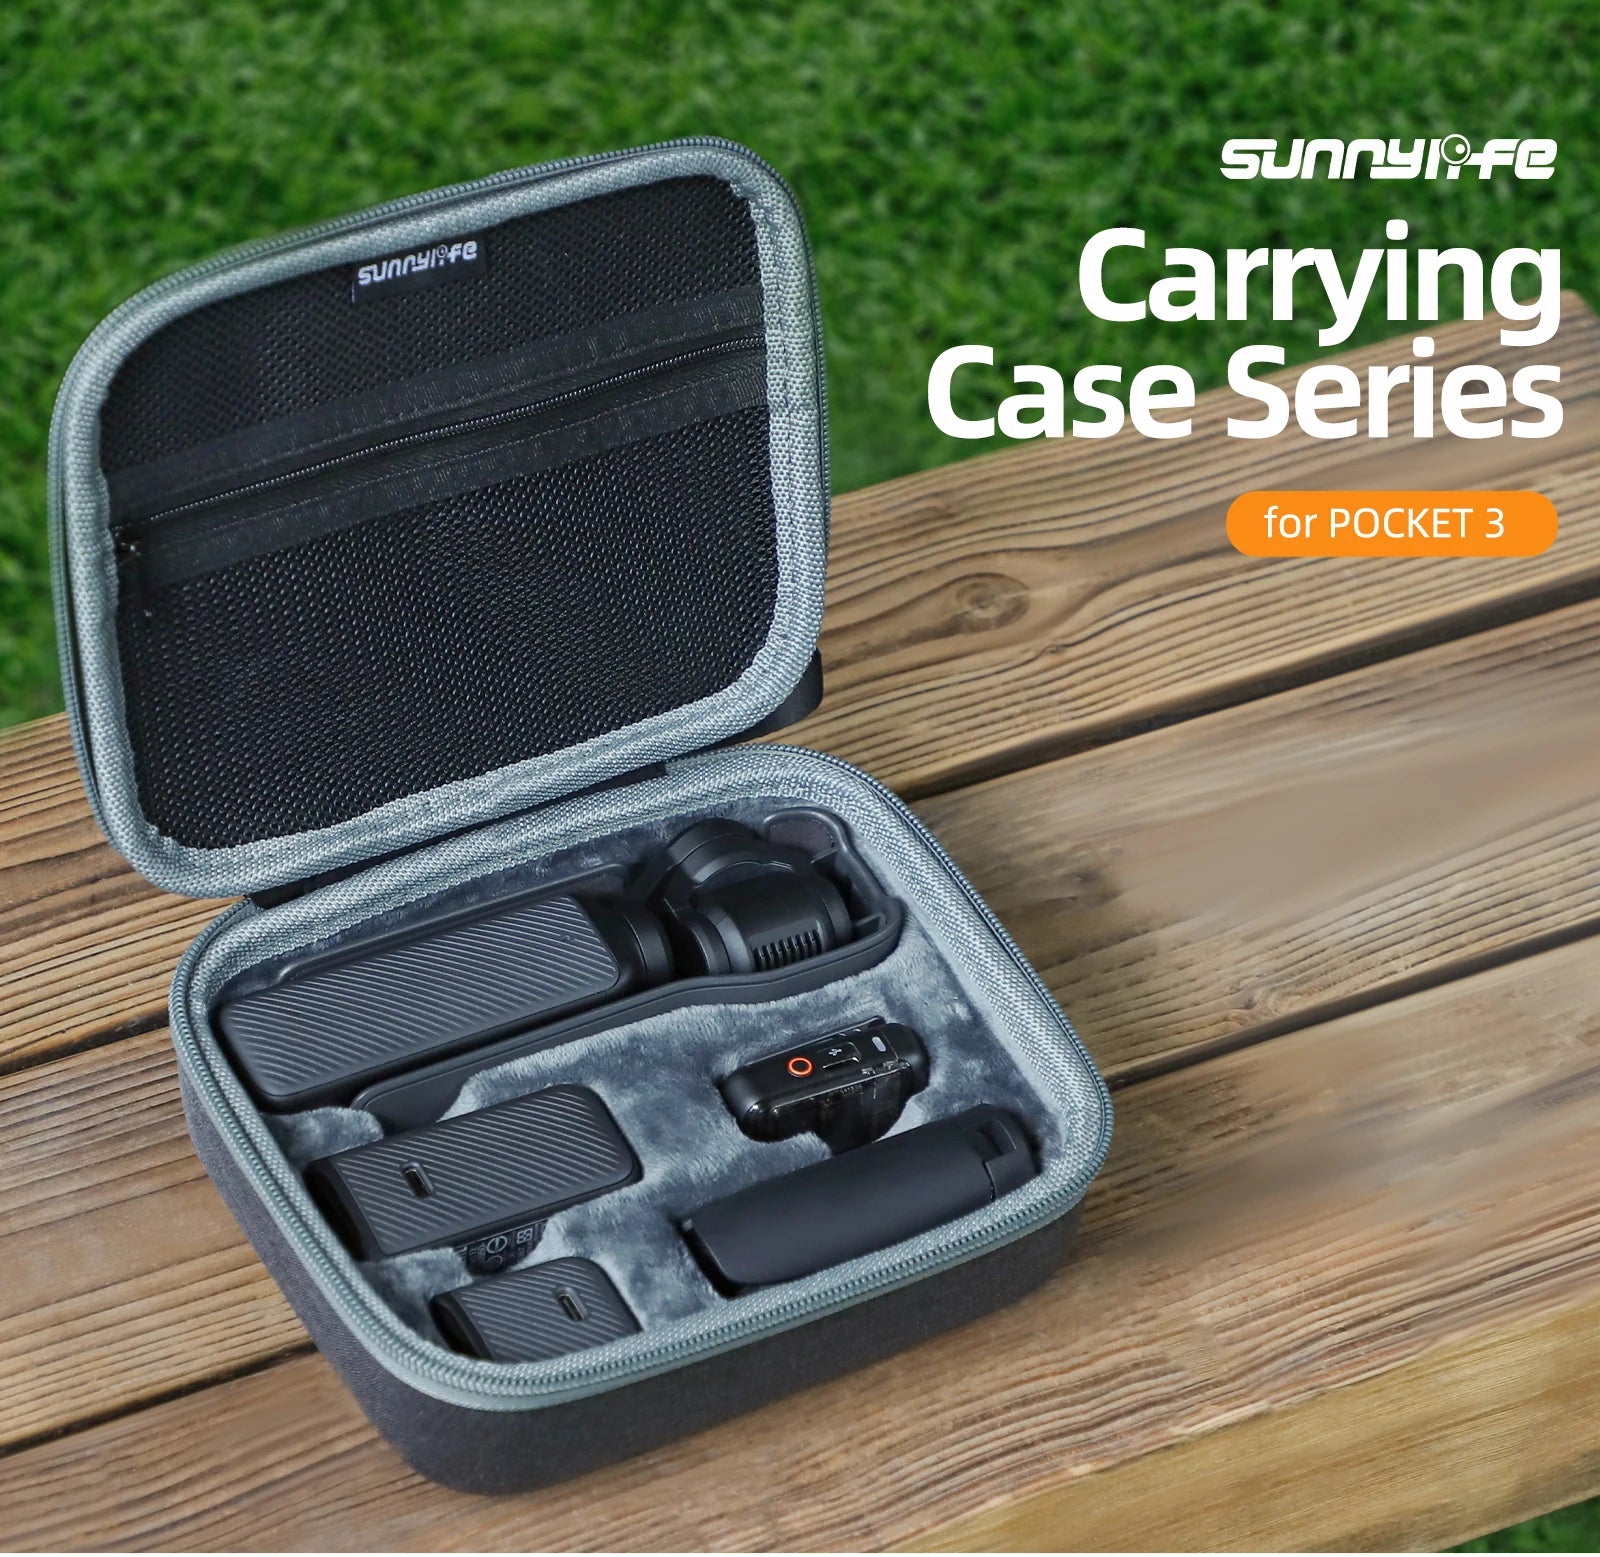 For DJI Pocket 3 Storage Bag, SunNYIoFe Carrying Case Series for POCKET 3 sunnyigf